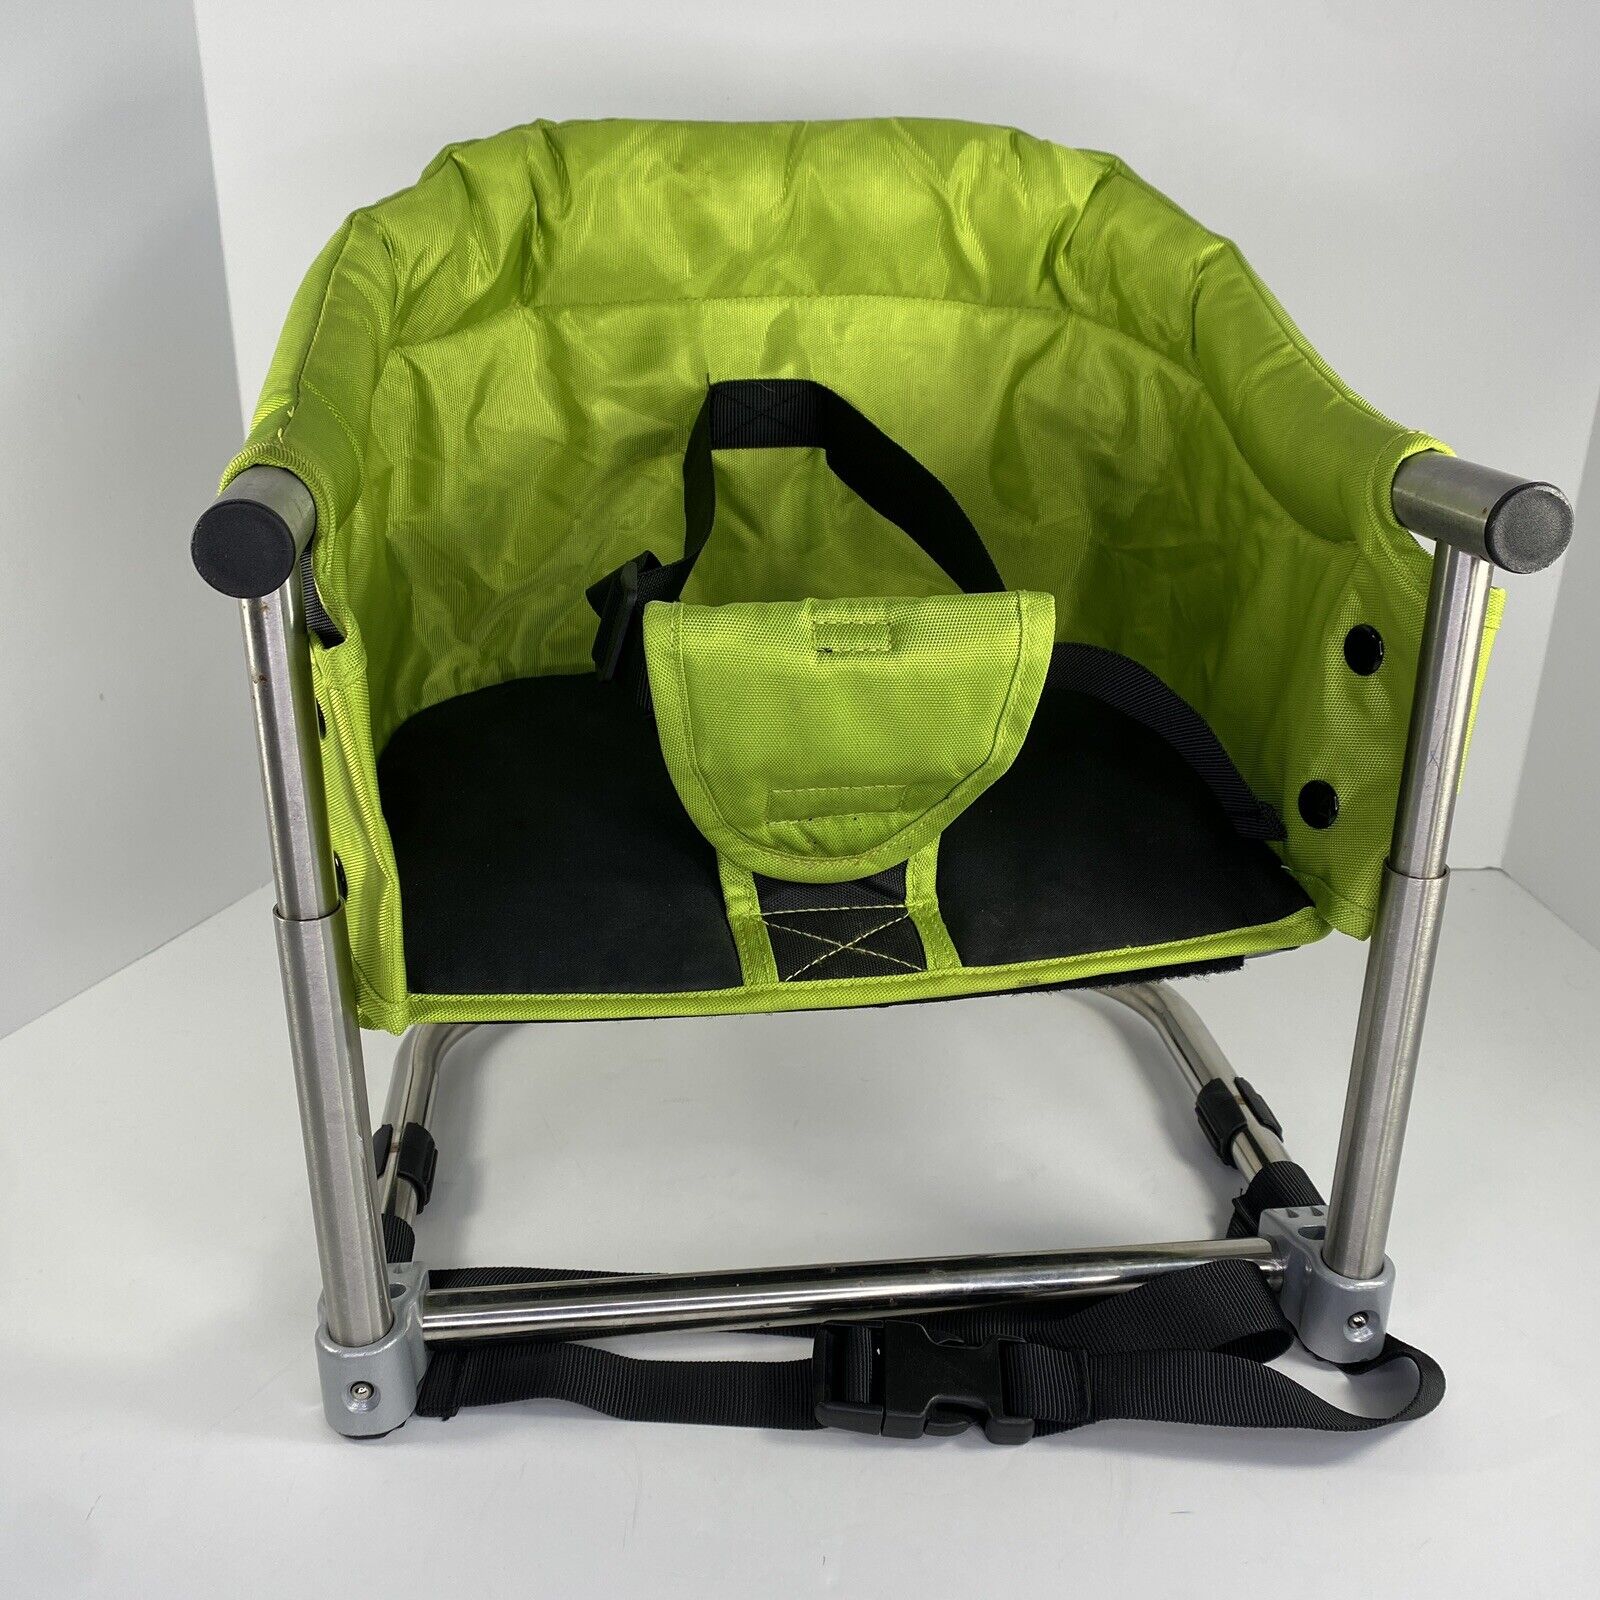 Toogel Green Booster Seat Or High Chair - Countertop Portable Collapsable Travel